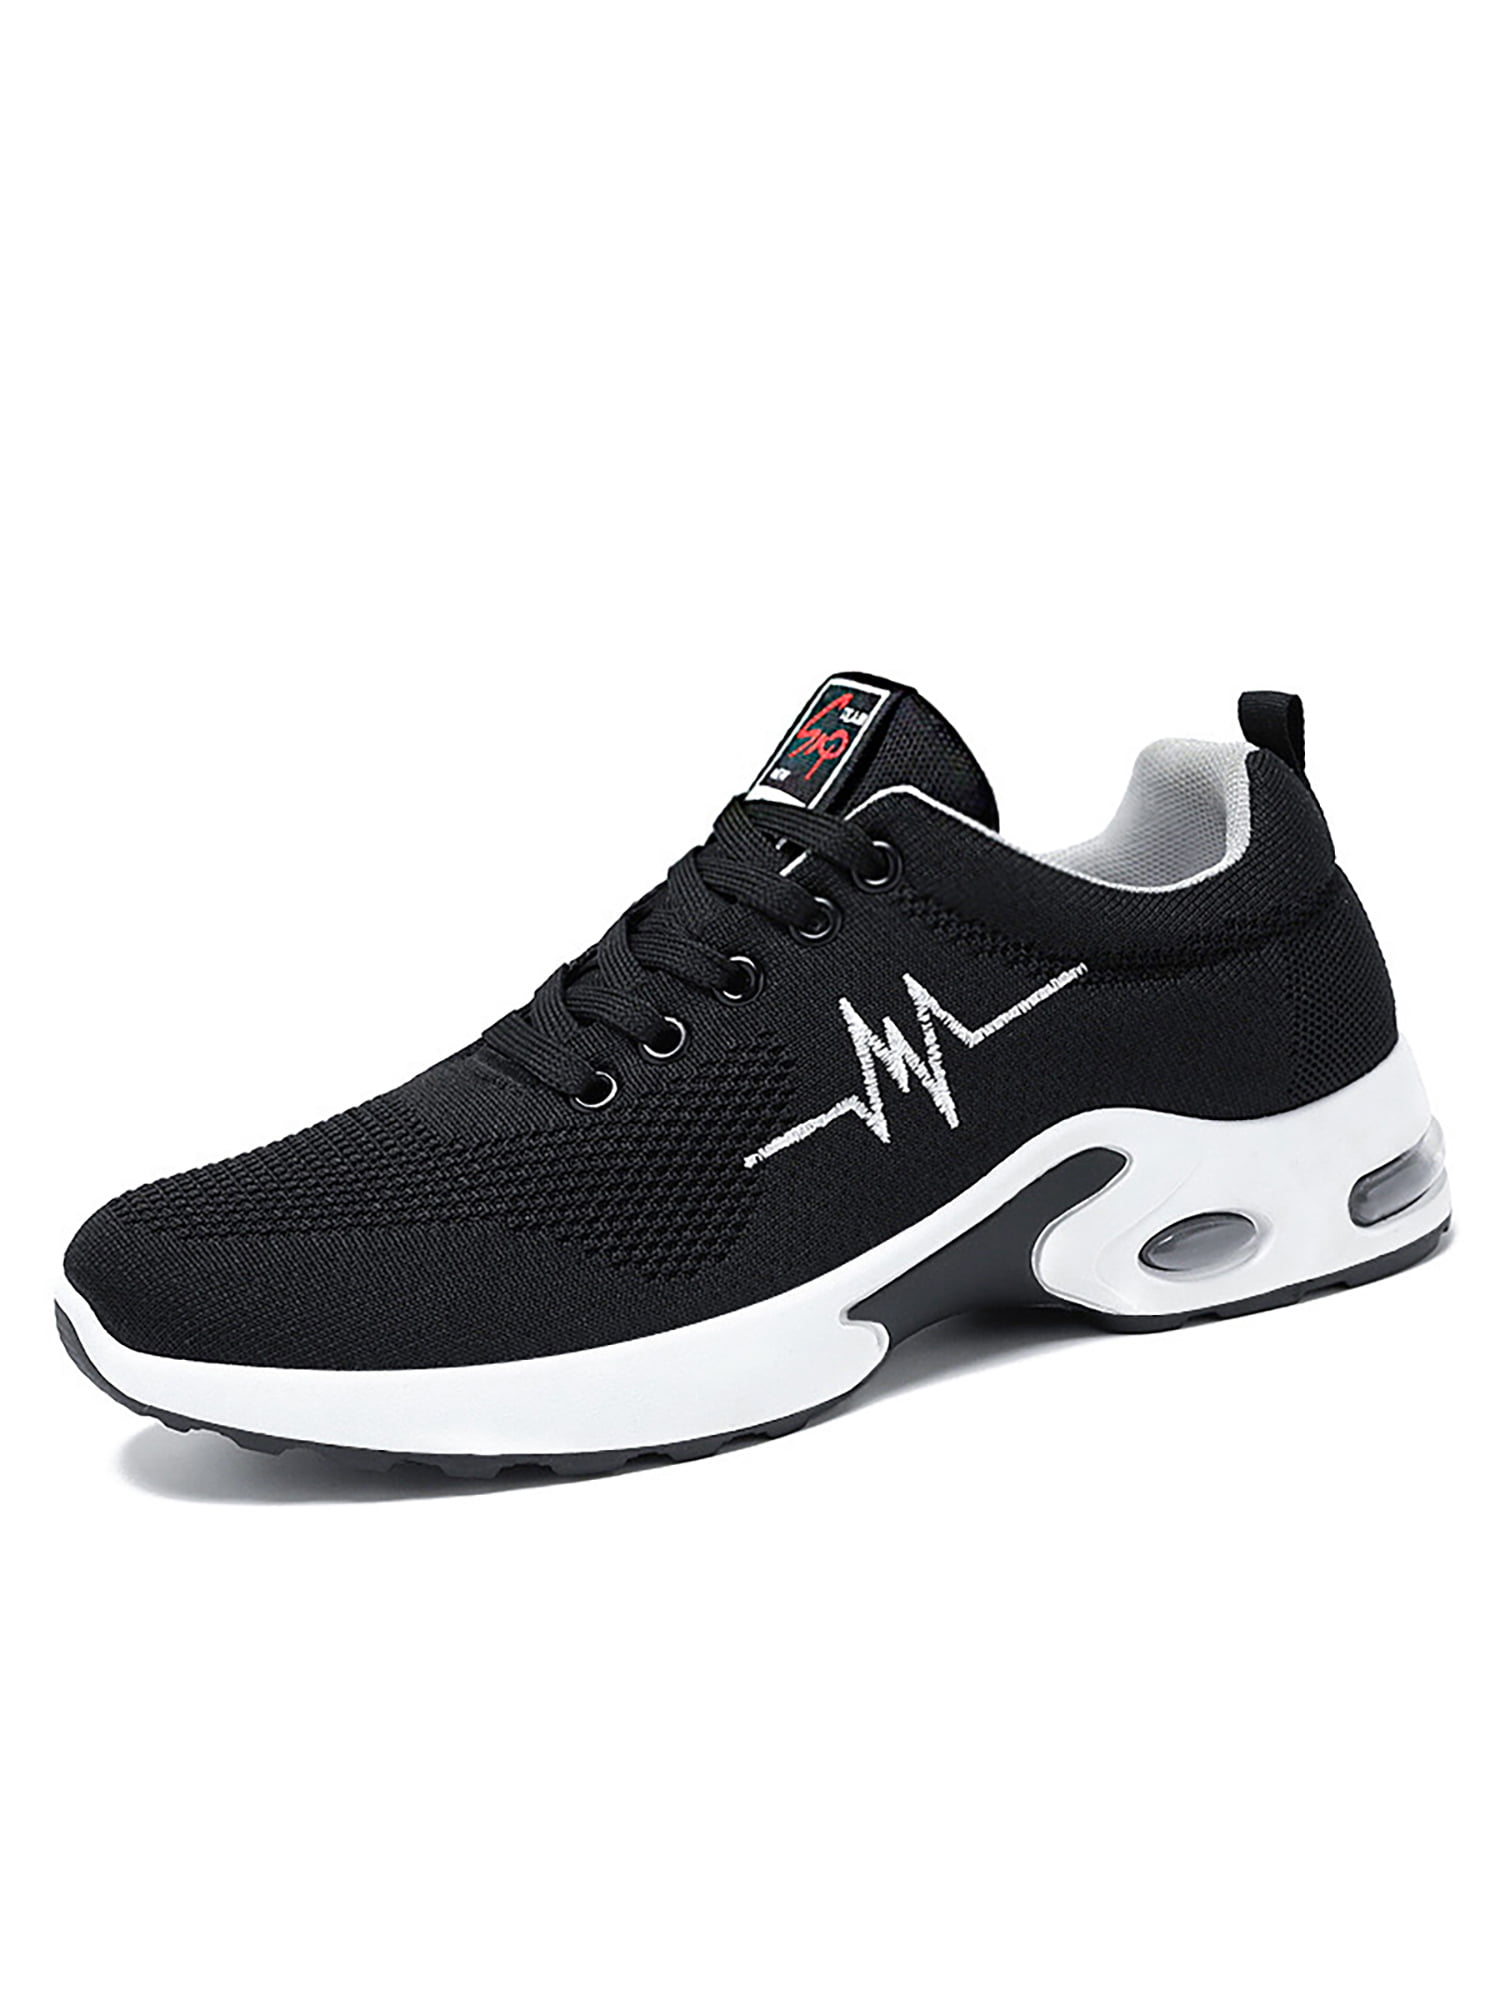 Mens Air Shock Fashion Gym Trainers Fitness Sports Running Casual Shoes Size 